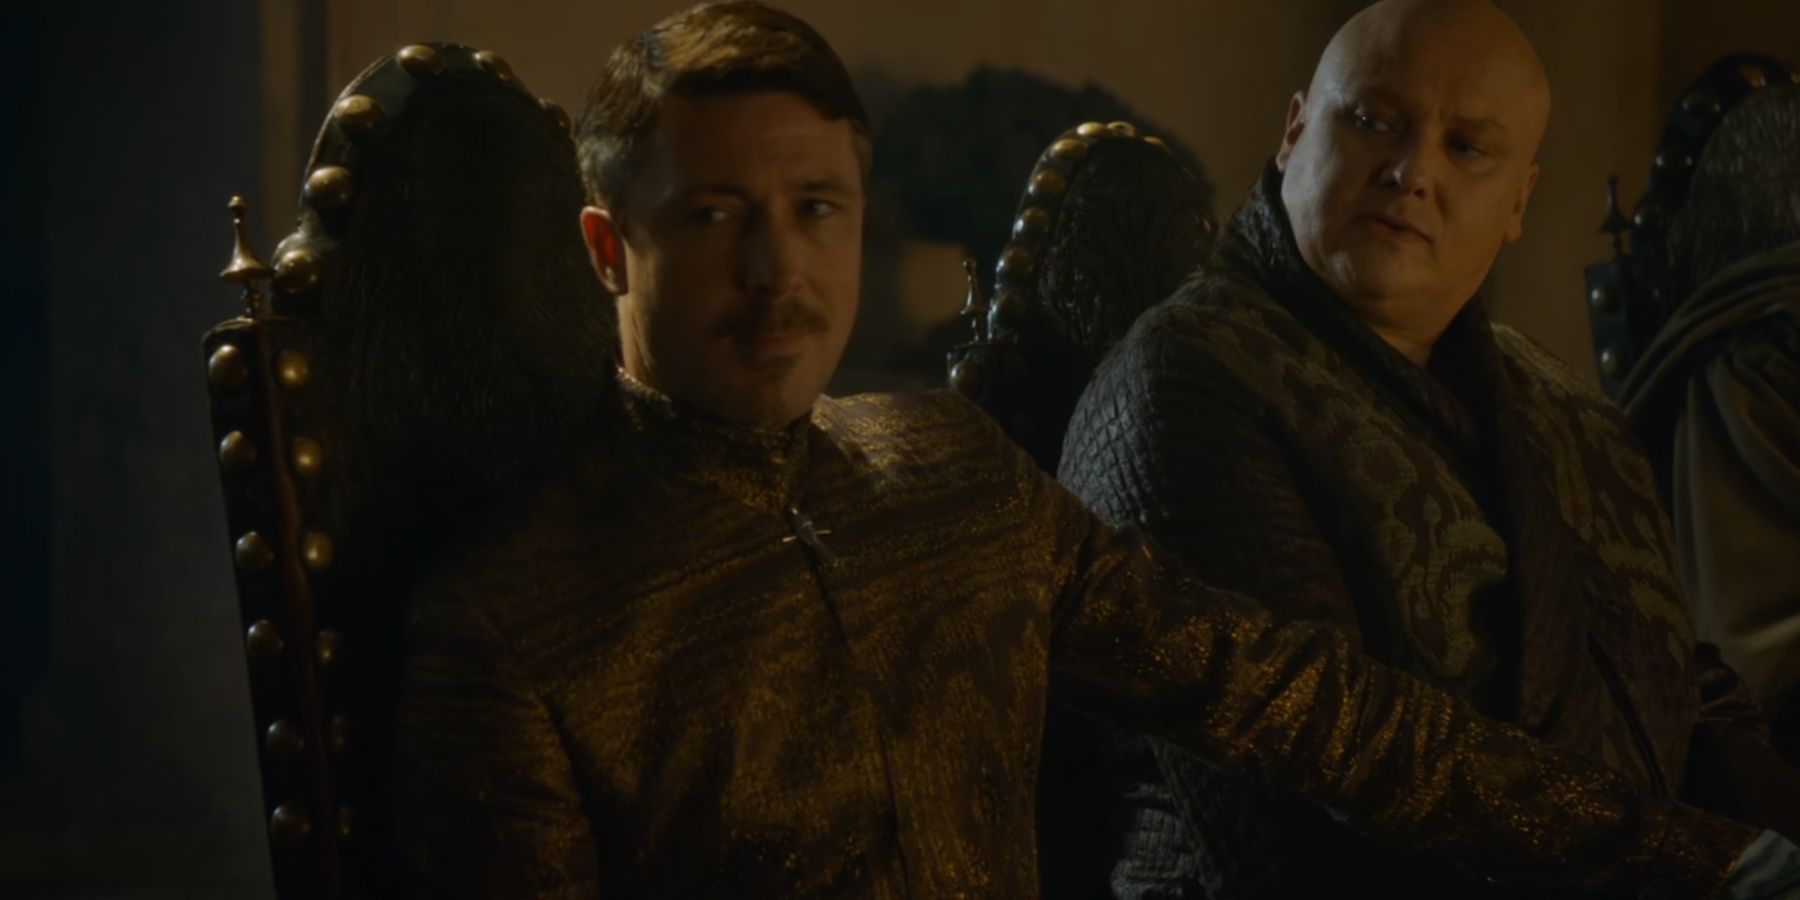 Lord Petyr Baelish and Lord Varys in Game of Thrones.